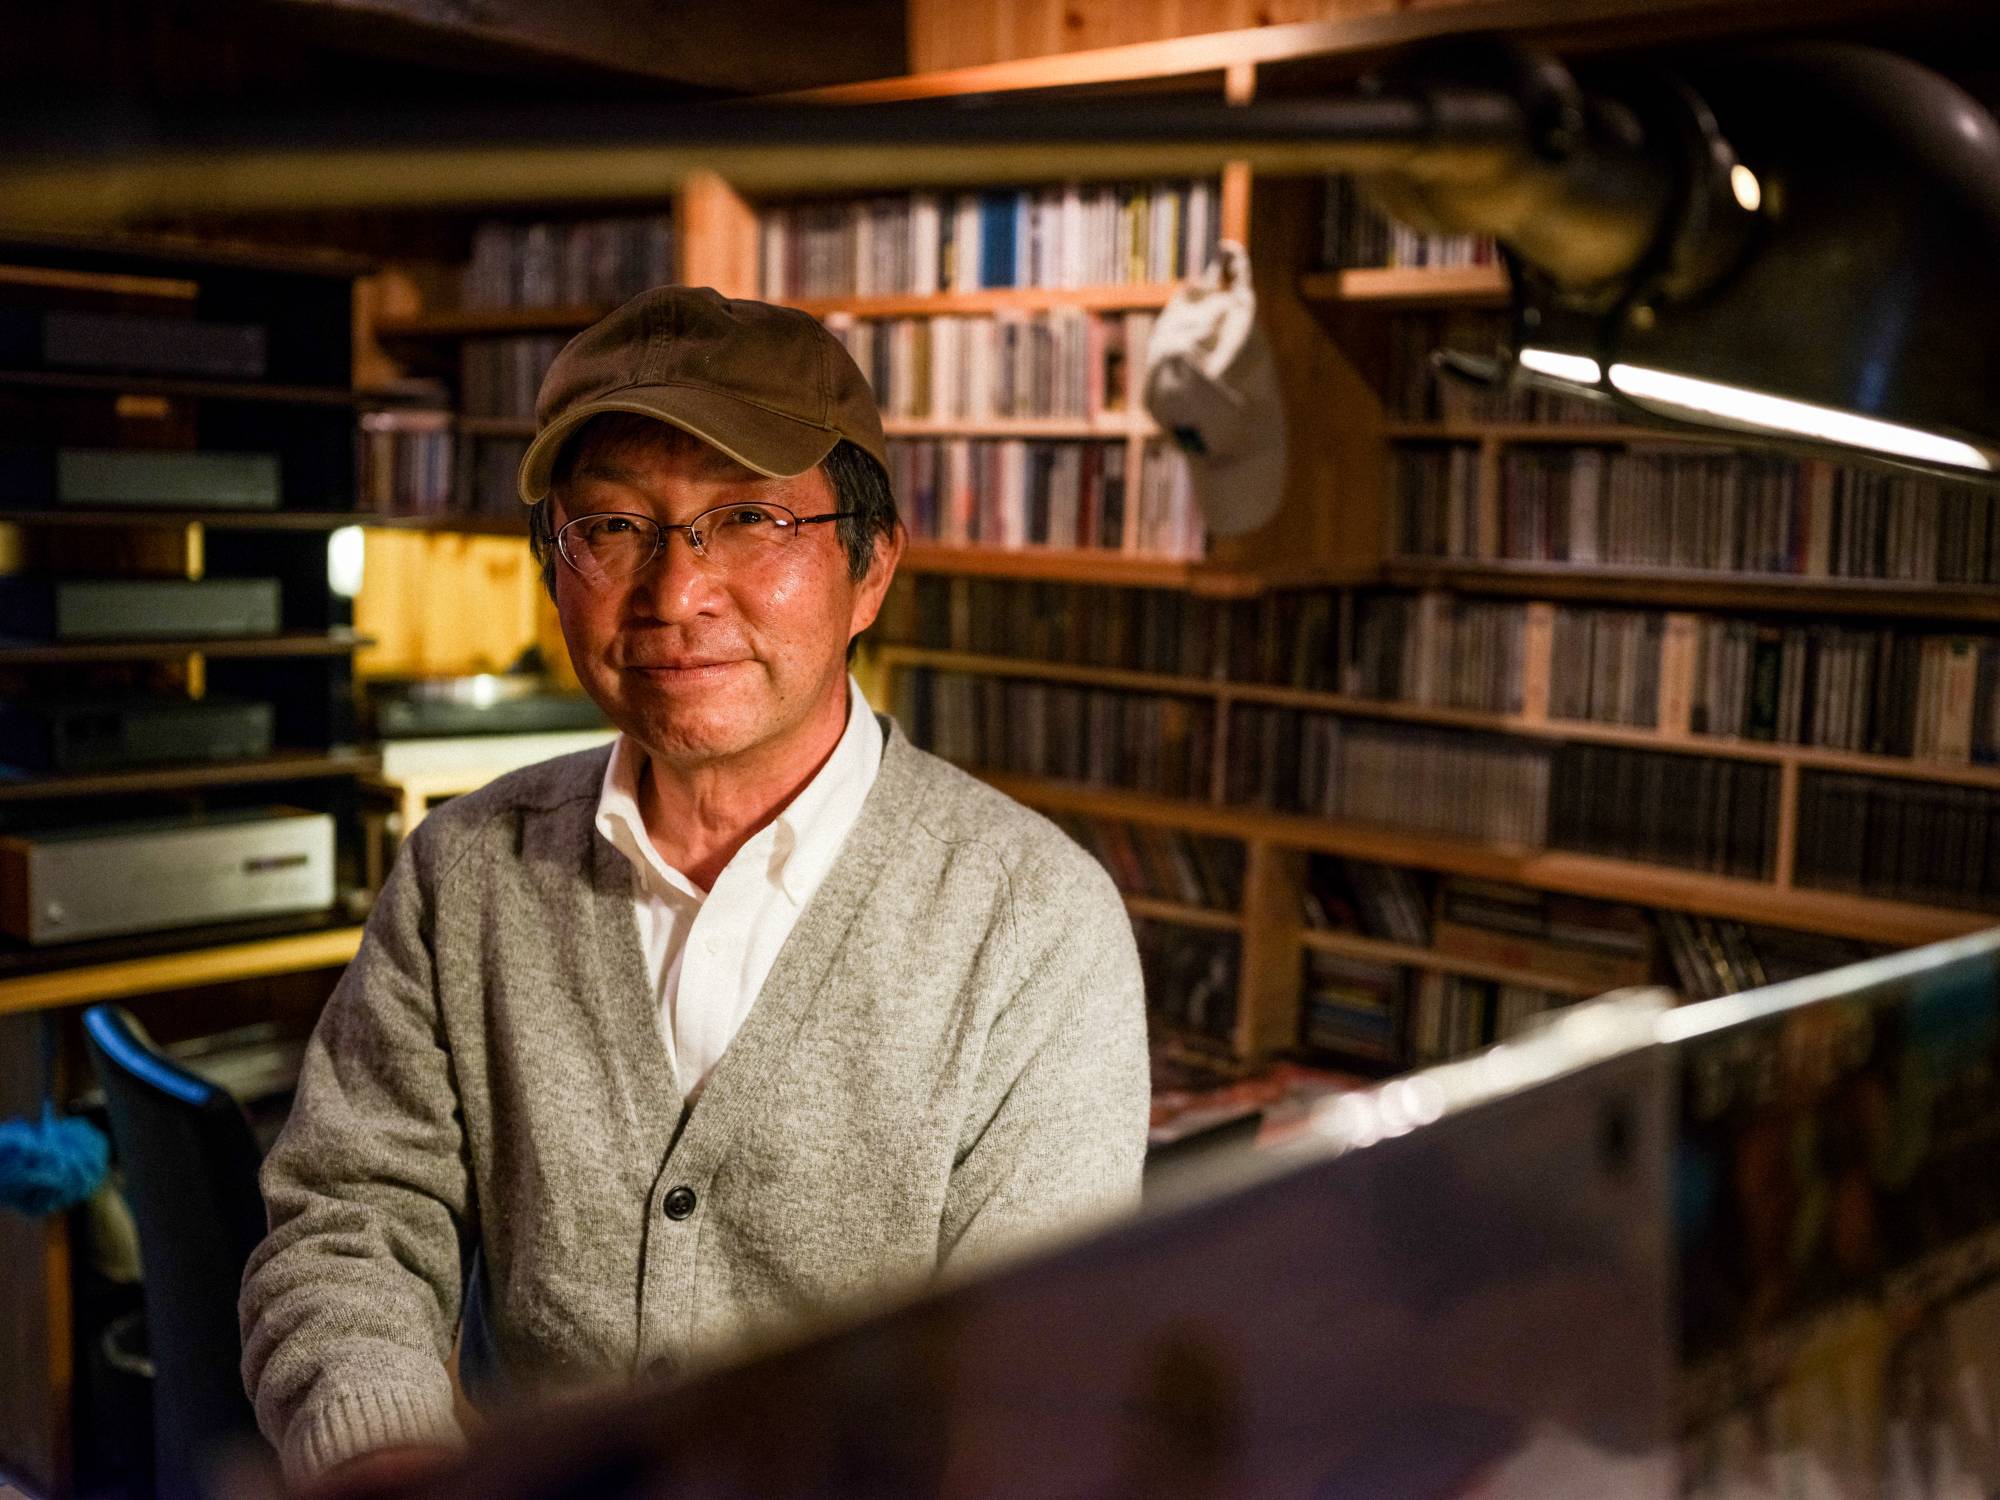 Atsushi Murakami, the creator of the Murakami Seven hop variety, sits in Brew Note Tono, his jazz bar, surrounded by records. He says, however, that Murakami Seven is more like classical music than jazz. | LANCE HENDERSTEIN